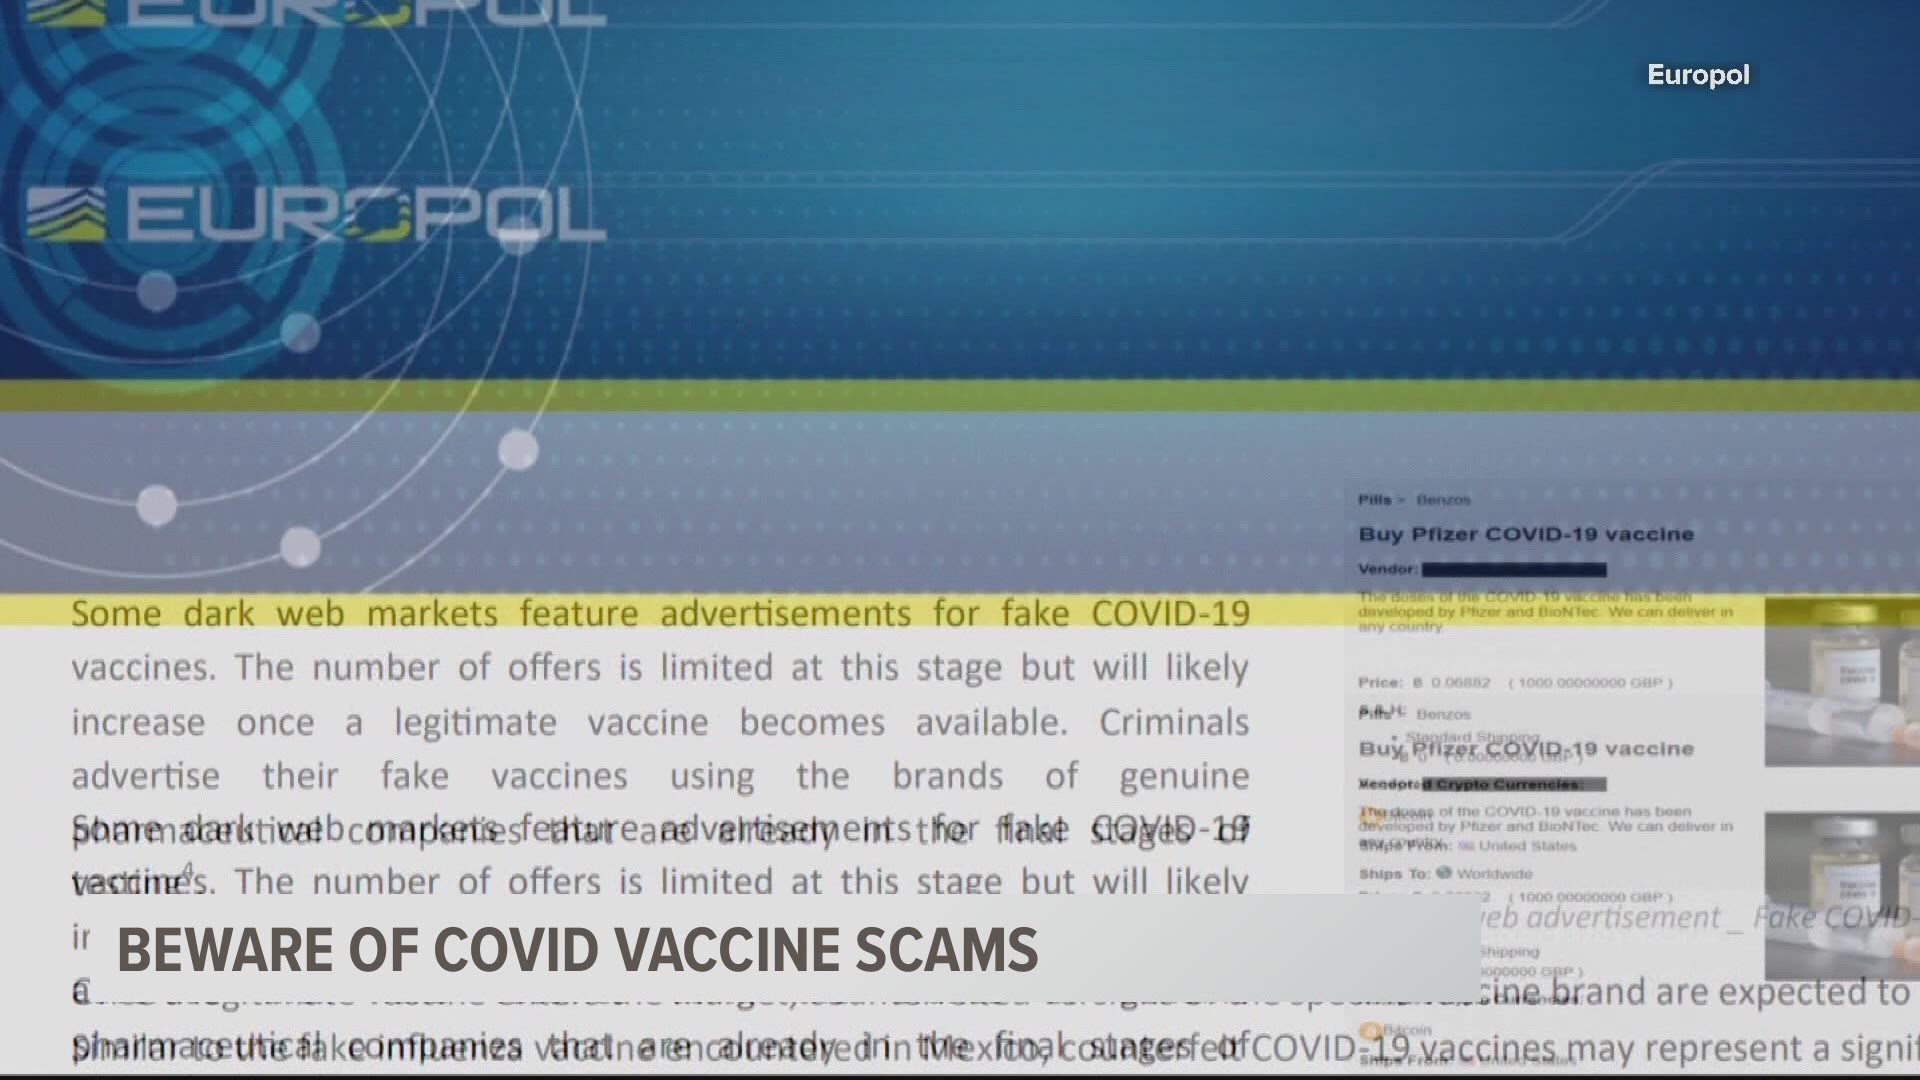 With the rollout of the COVID vaccine, scammers are trying to take advantage. Here's what to look out for.